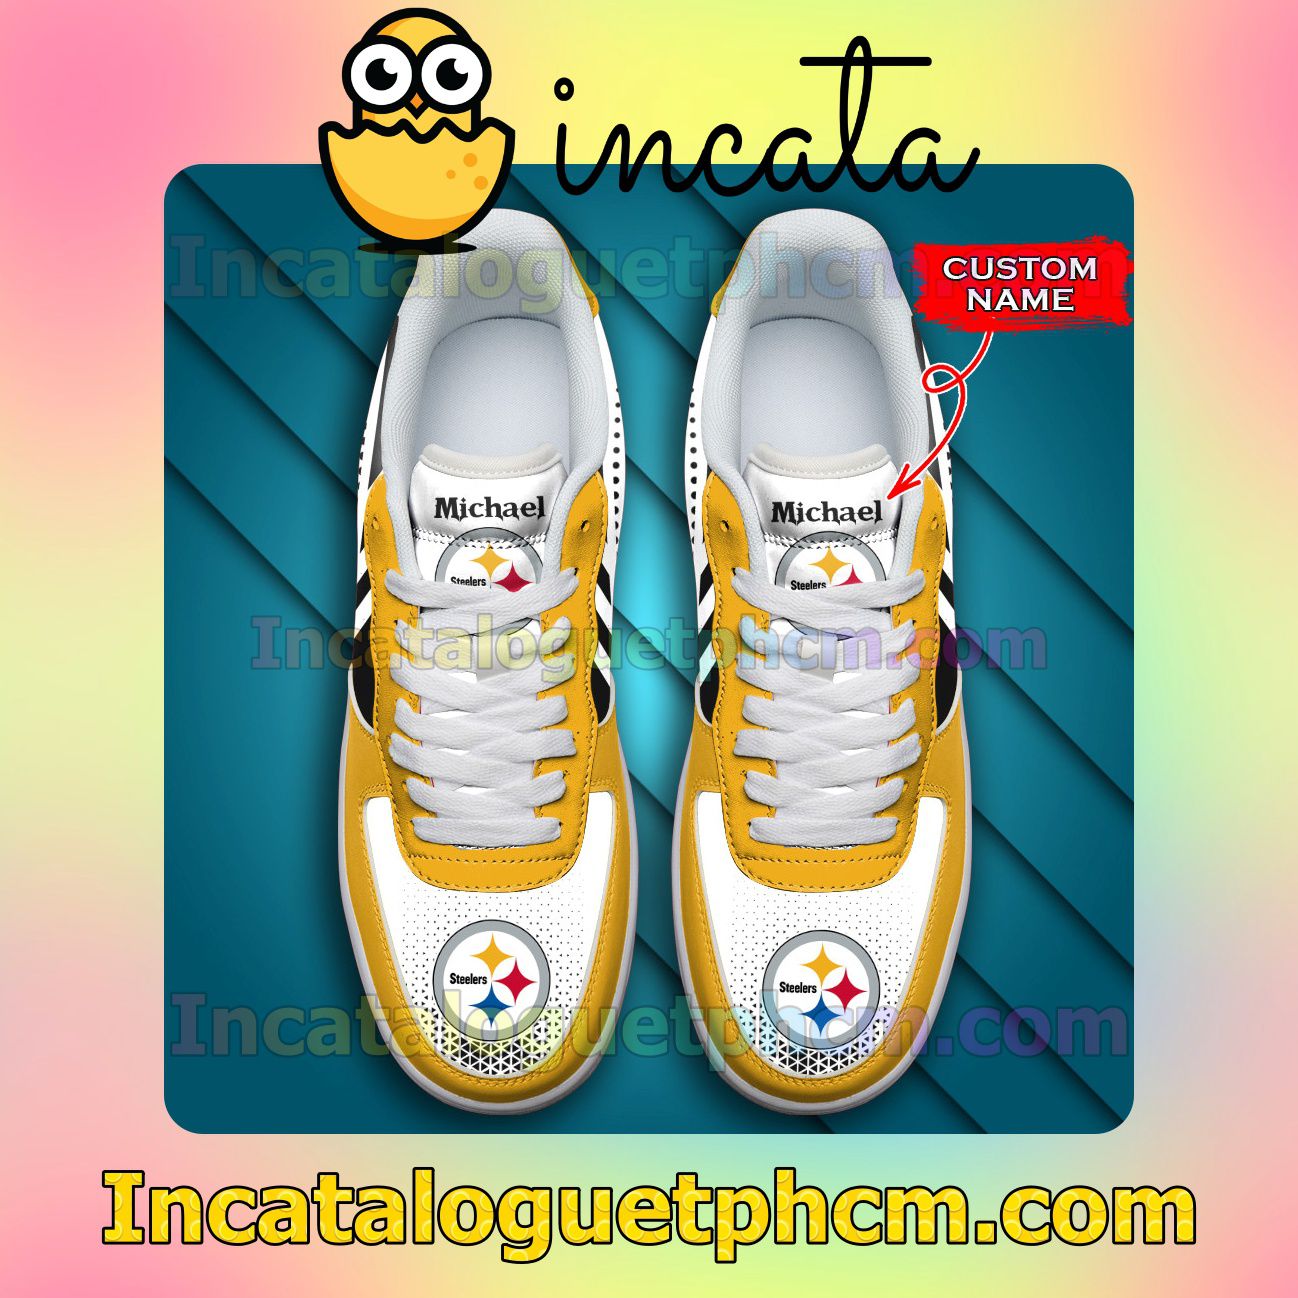 Personalized NFL Pittsburgh Steelers Custom Name Nike Low Shoes Sneakers